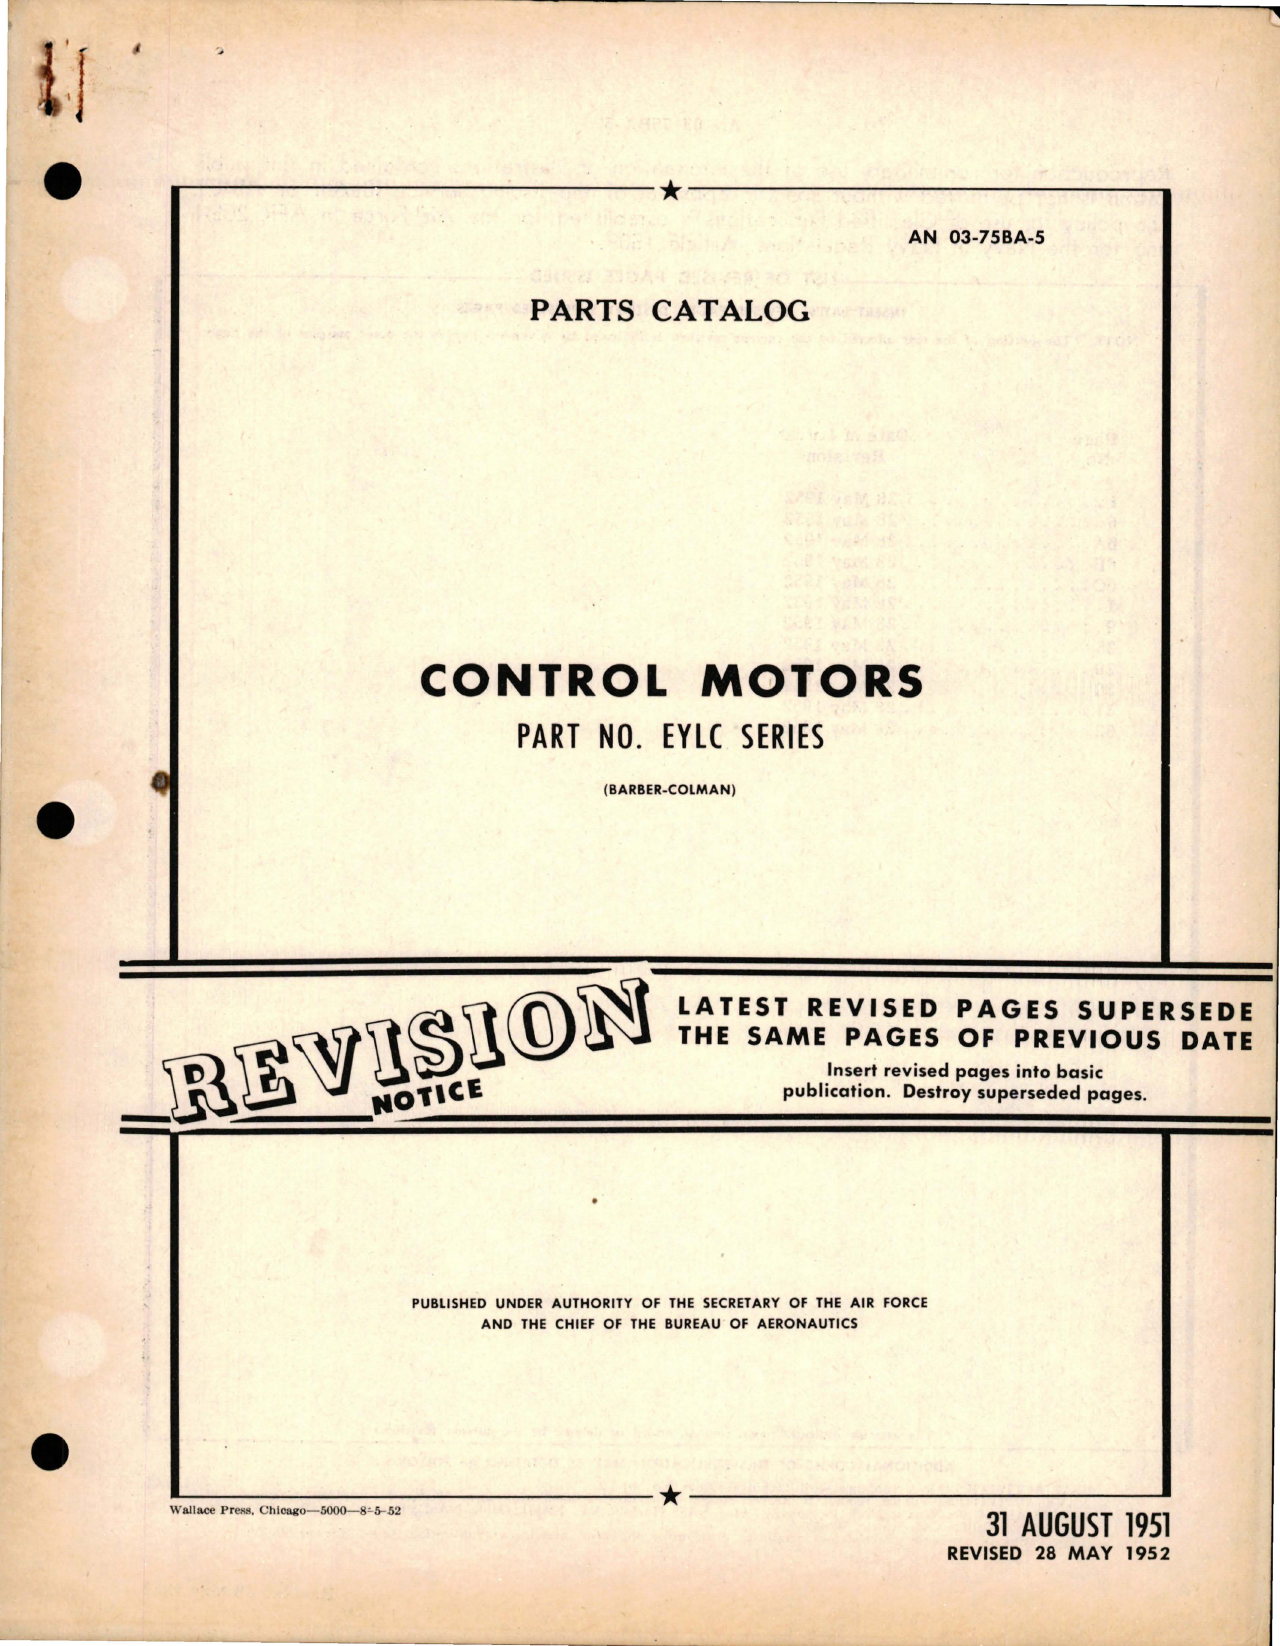 Sample page 1 from AirCorps Library document: Parts Catalog for Control Motors - Part EYLC Series 